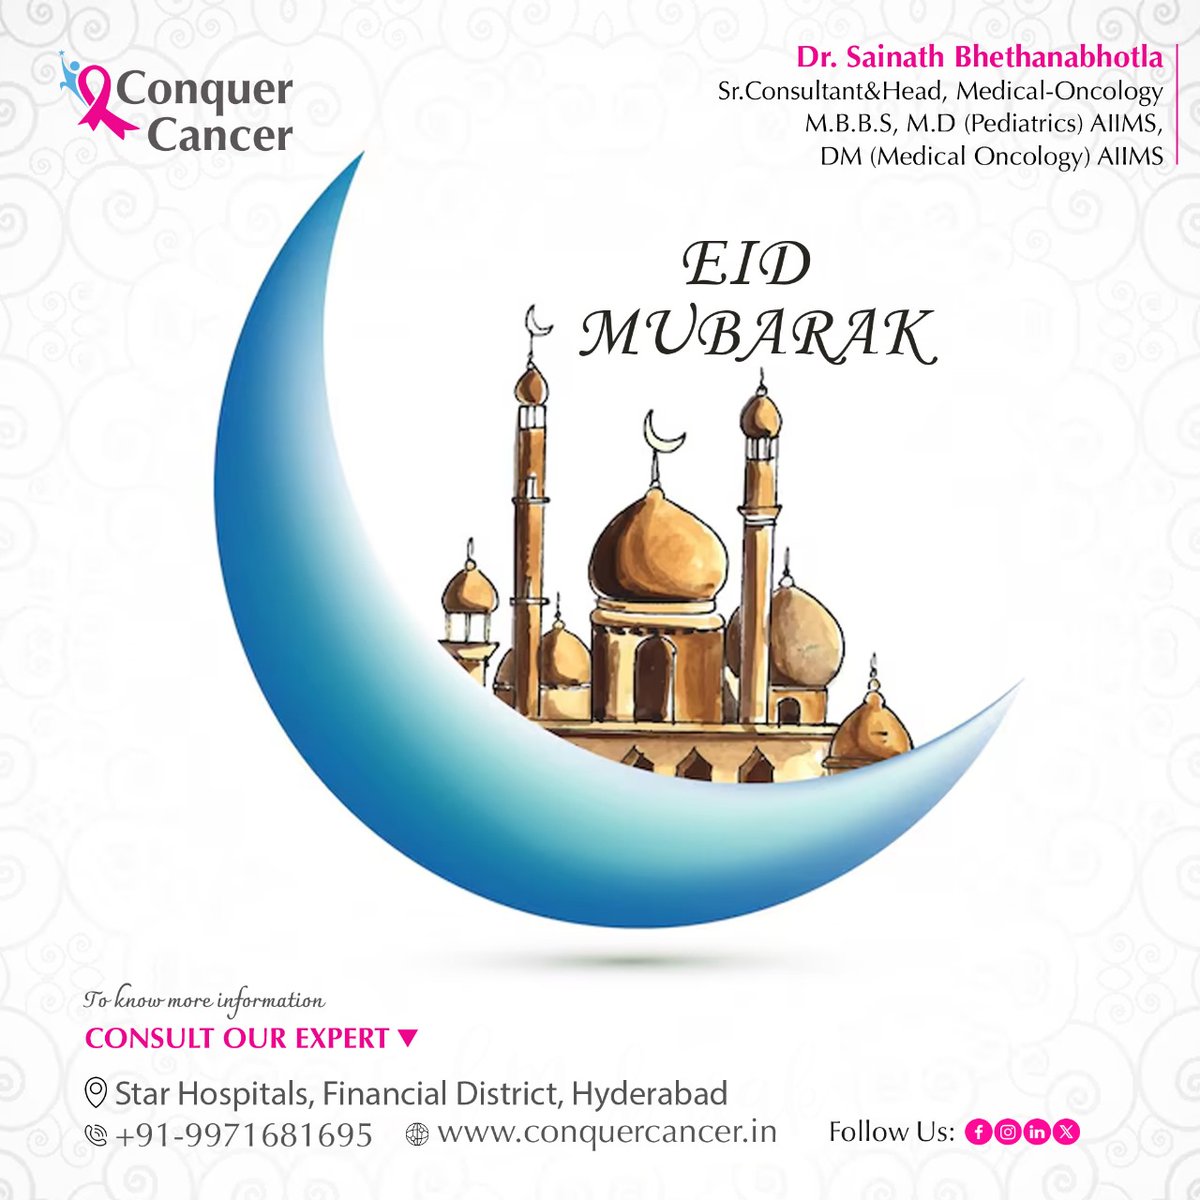 🌙💖 May this special day bring you hope, happiness, and healing. Let's continue our fight against cancer with renewed strength and unity. Eid Mubarak!

#ConquerCancer #CancerPrevention #CancerTreatment #Nanakramguda #financialdistrict #gachibowli #Cancer #Oncology #drsainath